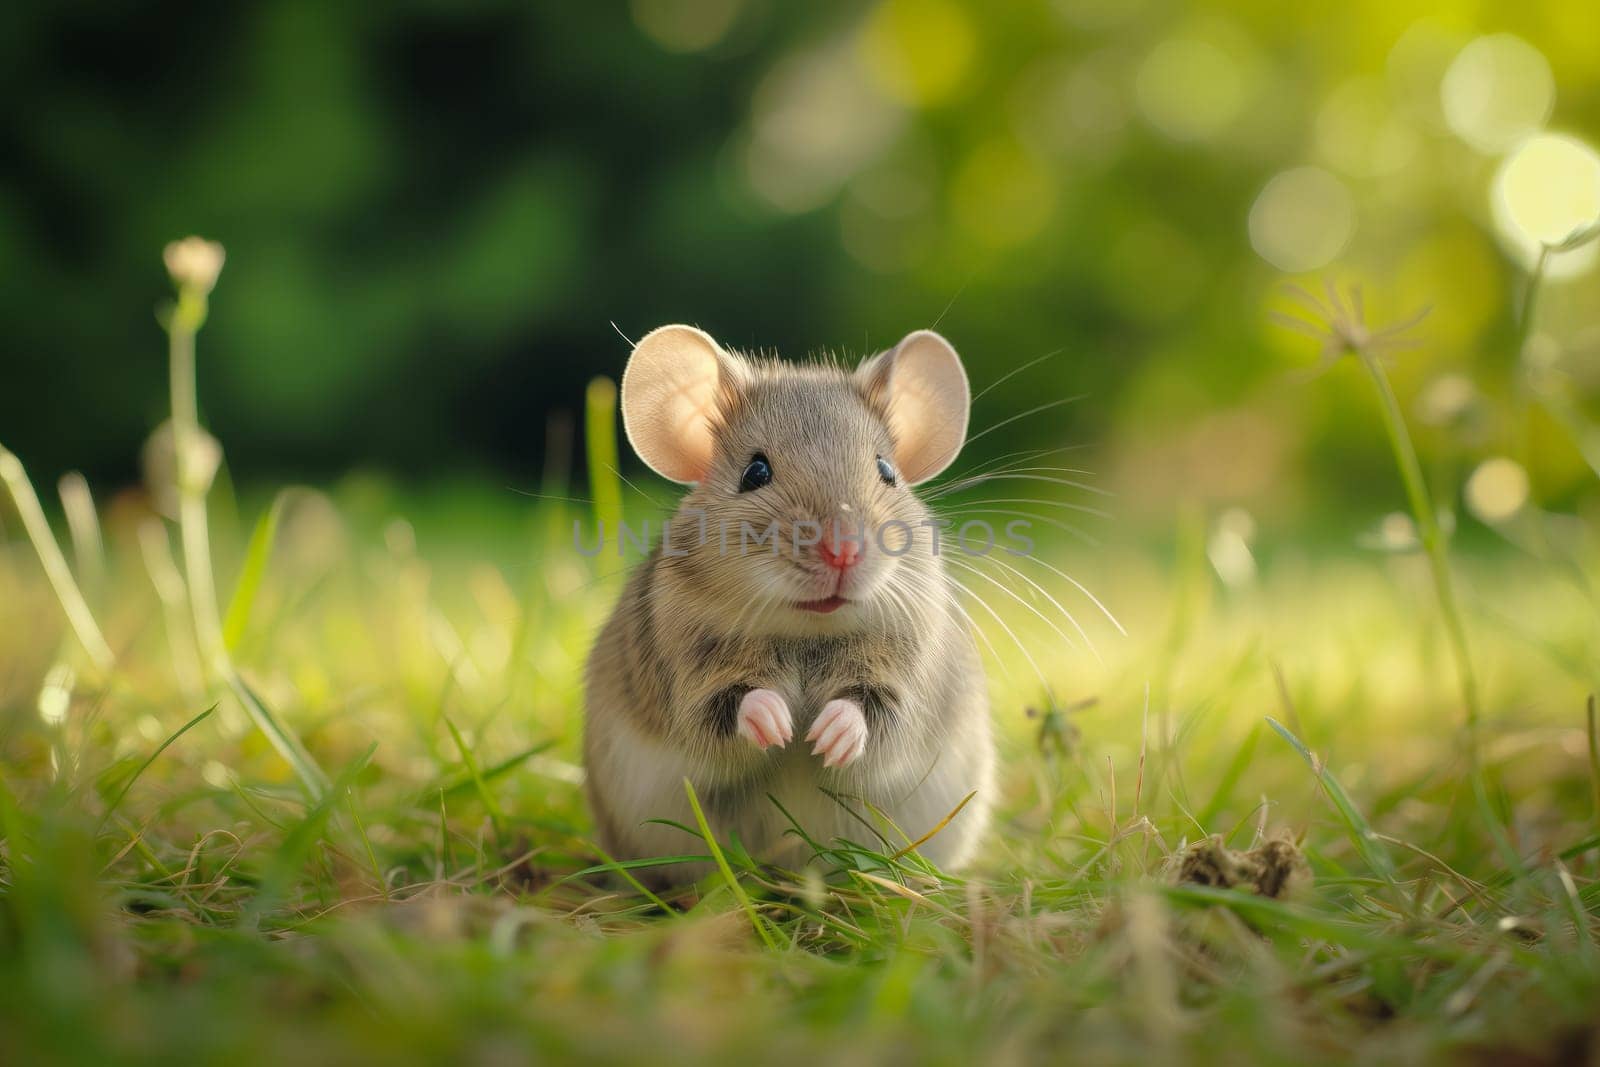 Cute mouse with large ears, exploring the vibrant green grass on a sunny day